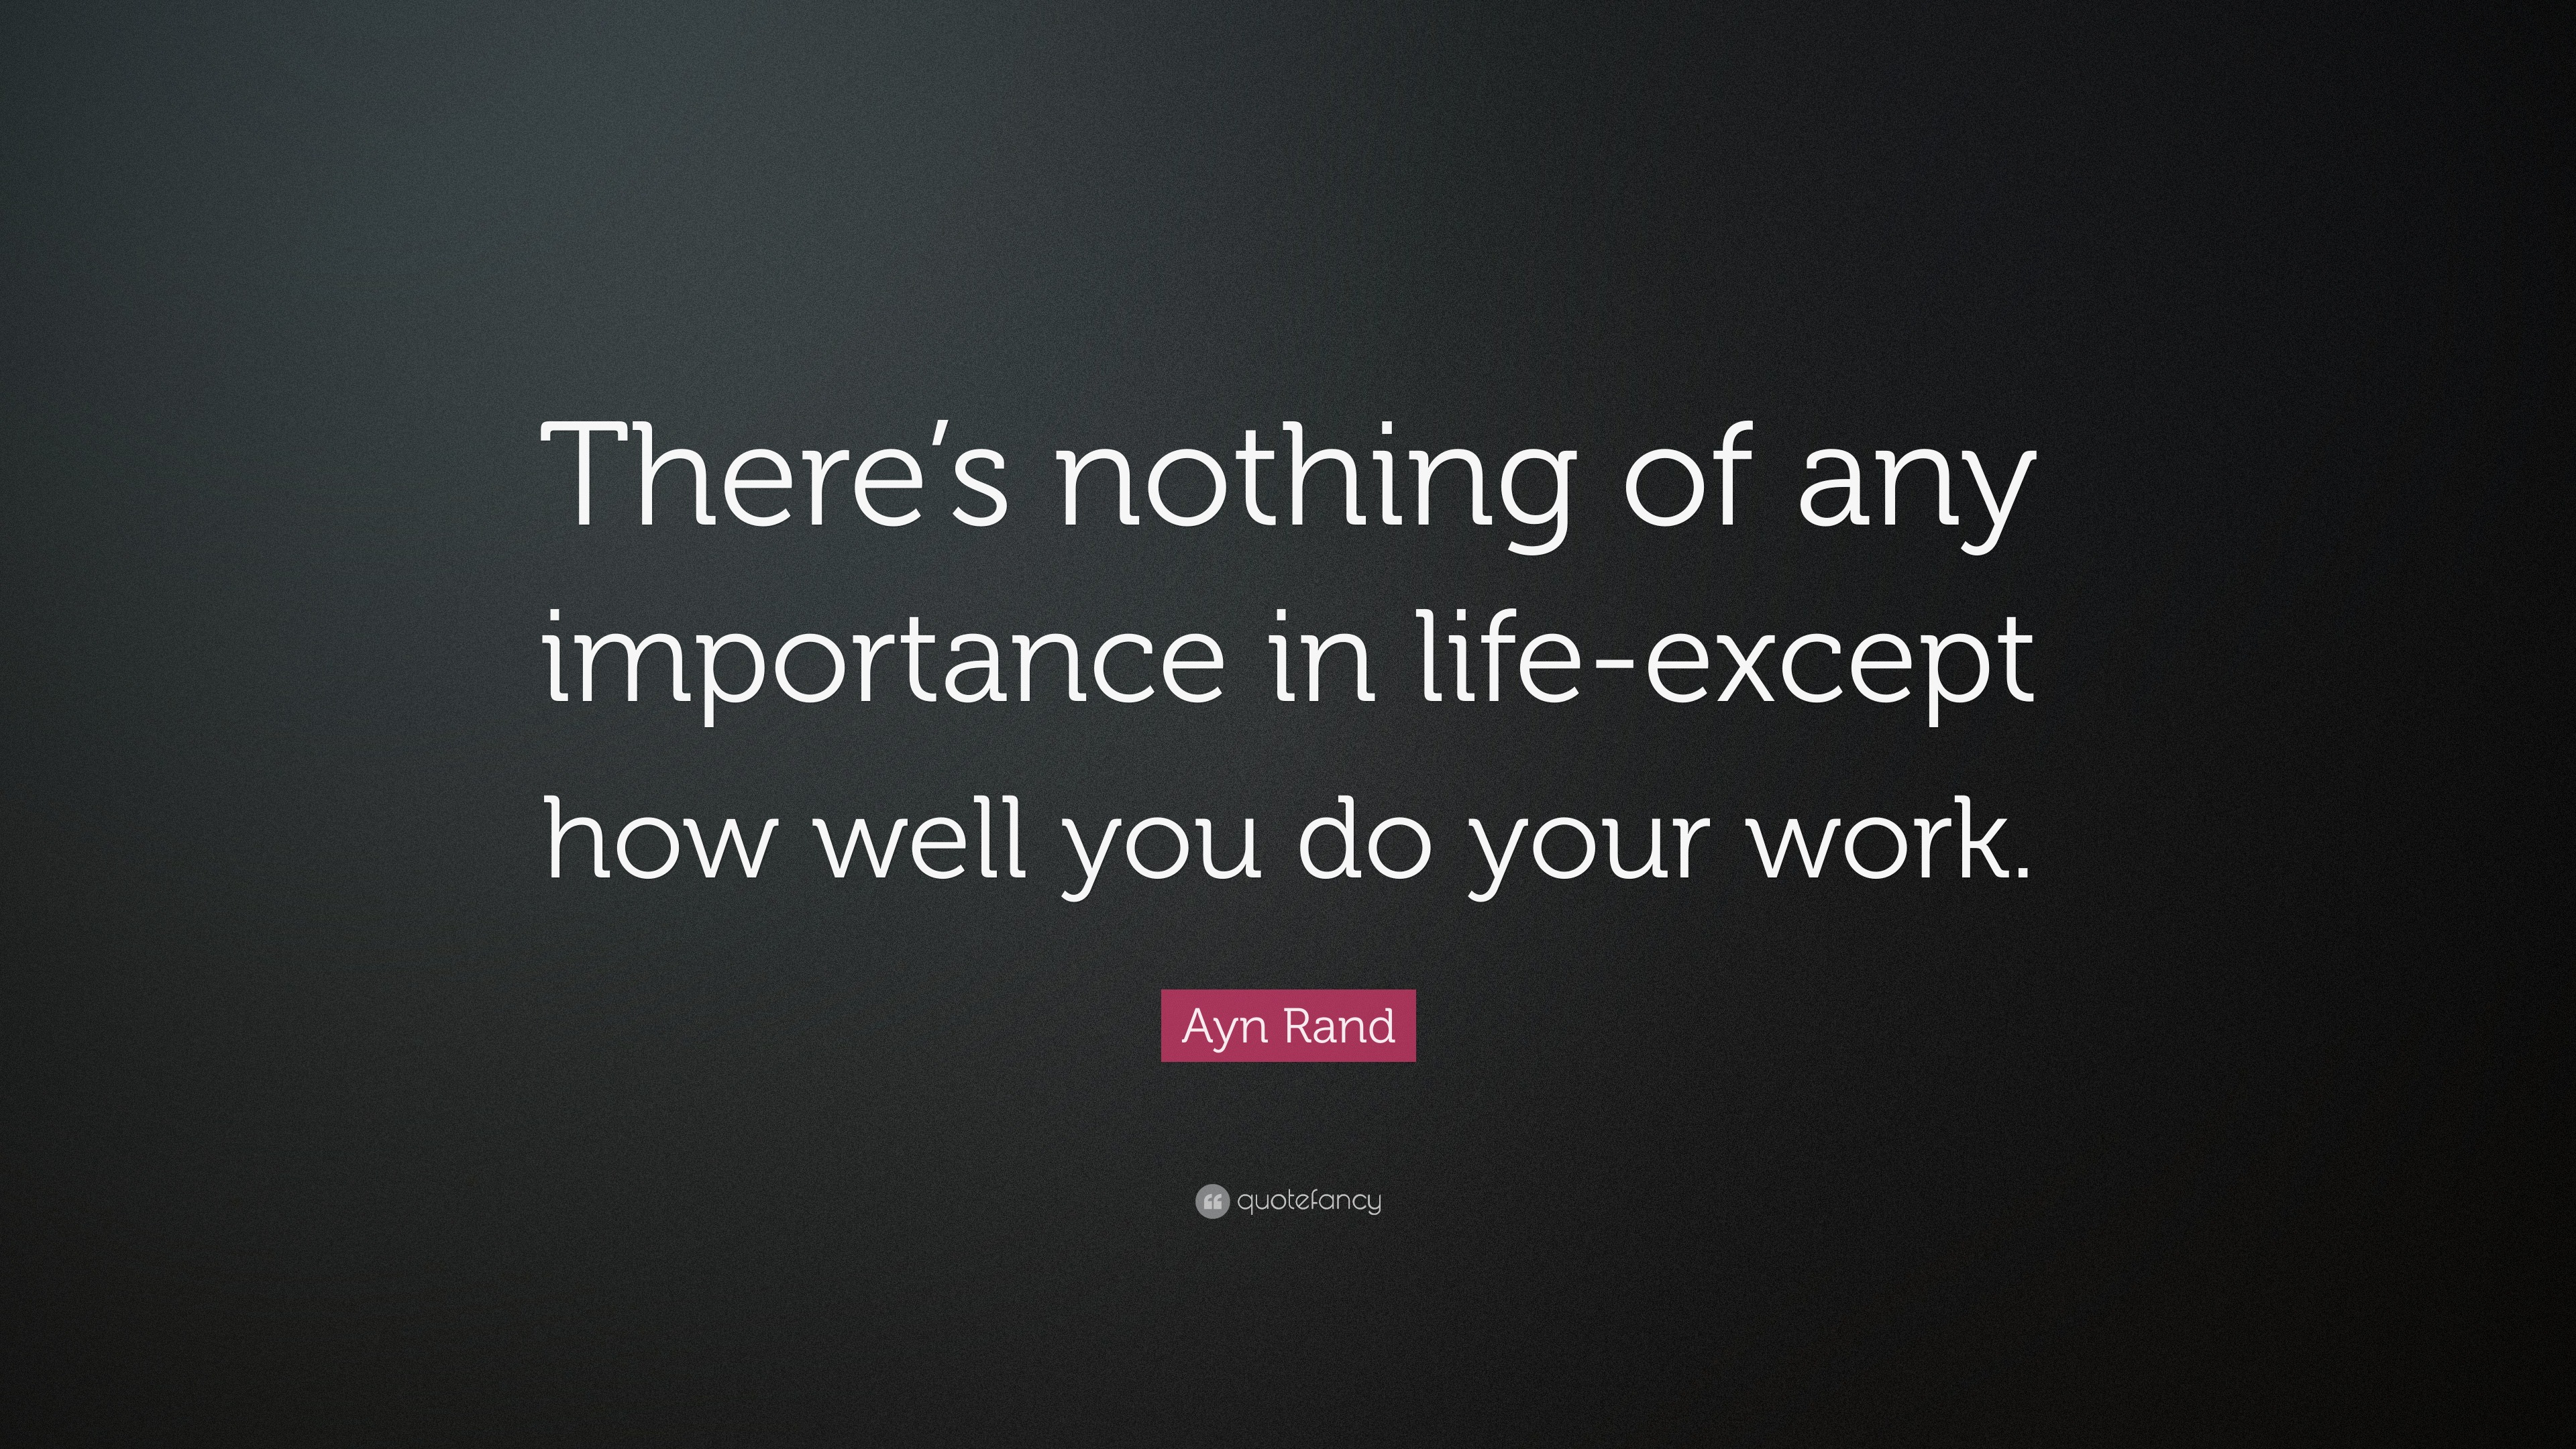 Ayn Rand Quote: “There’s nothing of any importance in life-except how ...